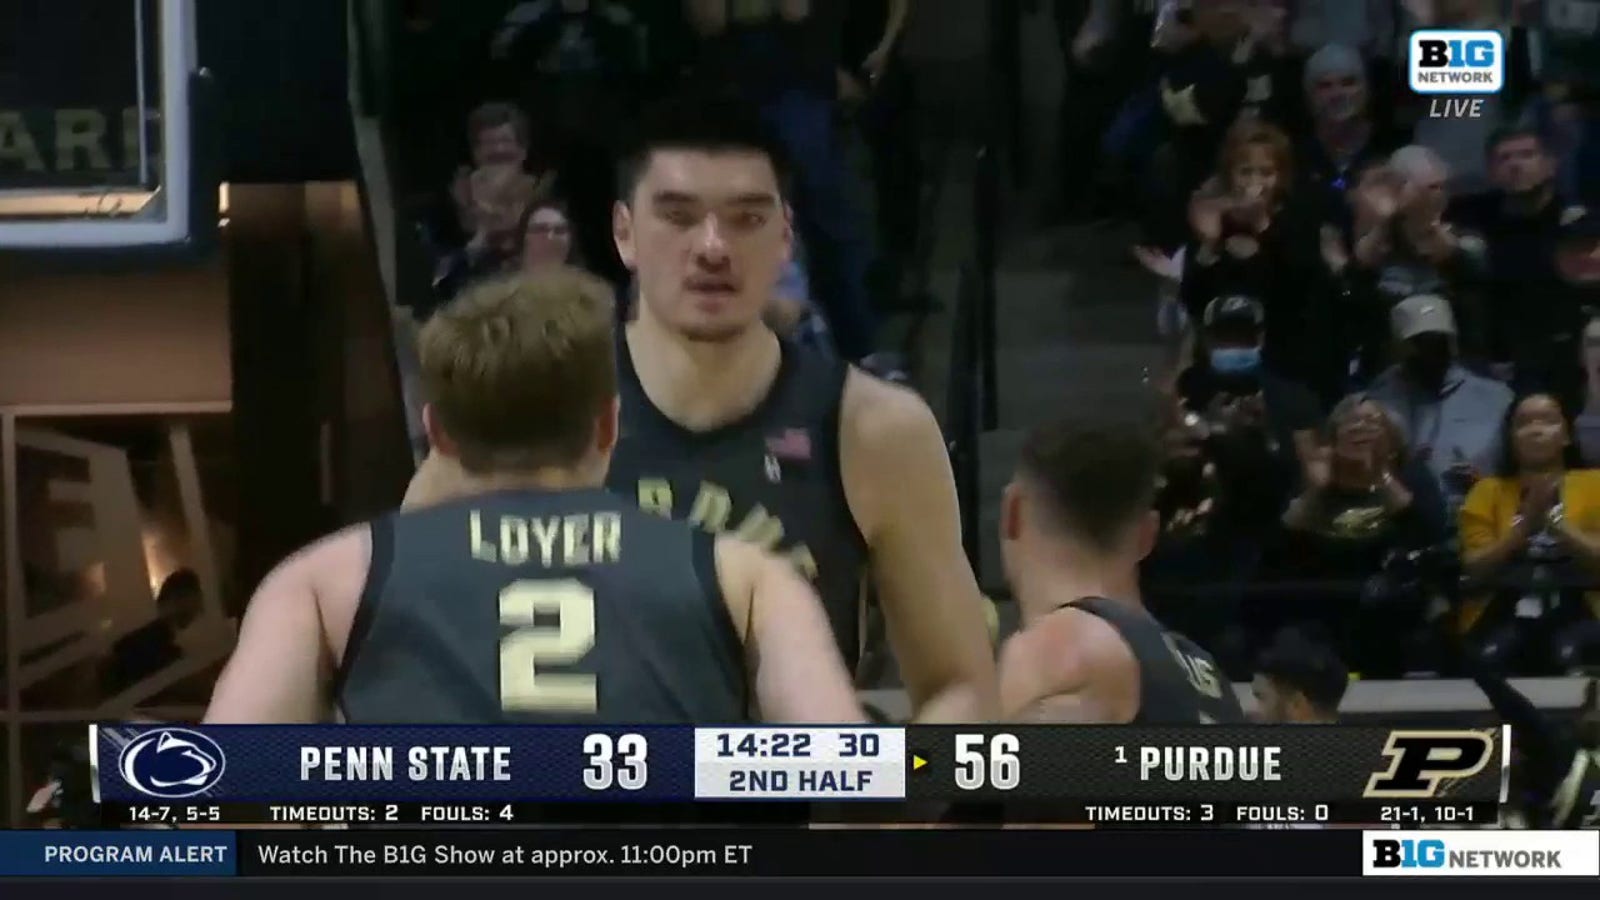 Zach Edey hammers home an alley-oop dunk to extend Purdue's lead